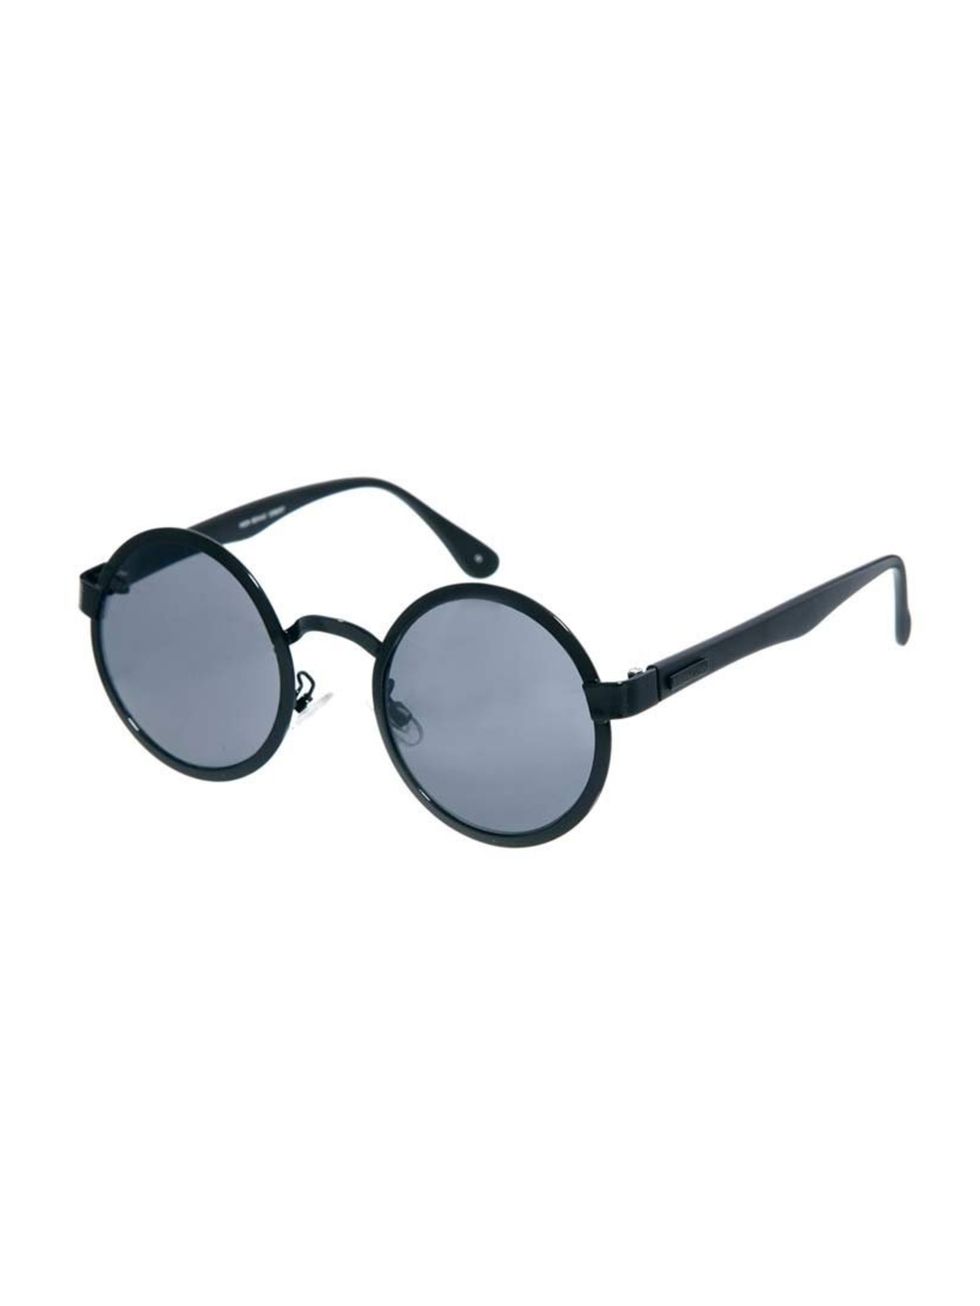 <p>Minkpink high beam sunglasses, £33 at <a href="http://www.asos.com/Minkpink/Minkpink-High-Beams-Sunglasses/Prod/pgeproduct.aspx?iid=3988059&amp;SearchQuery=round%20sunglasses&amp;sh=0&amp;pge=0&amp;pgesize=204&amp;sort=-1&amp;clr=Black">ASOS</a>. </p>